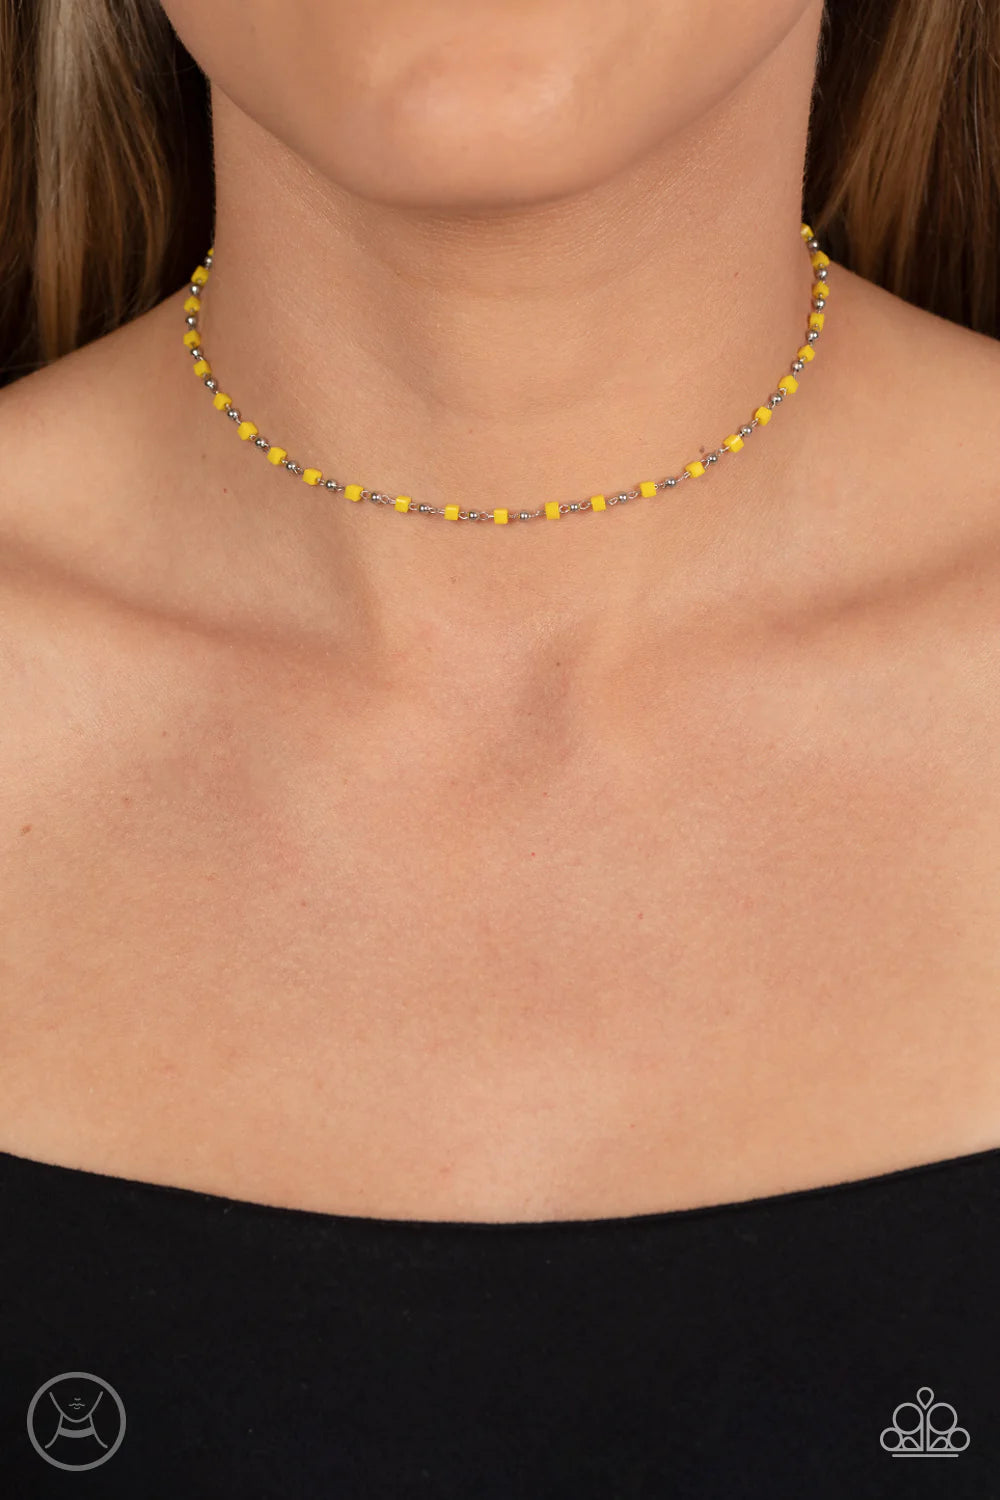 Paparazzi Accessories Neon Lights - Yellow Dainty silver beads and square Samoan Sun beads delicately link around the neck, creating a minimalist inspired bright pop of color. Features an adjustable clasp closure. Sold as one individual choker necklace. I